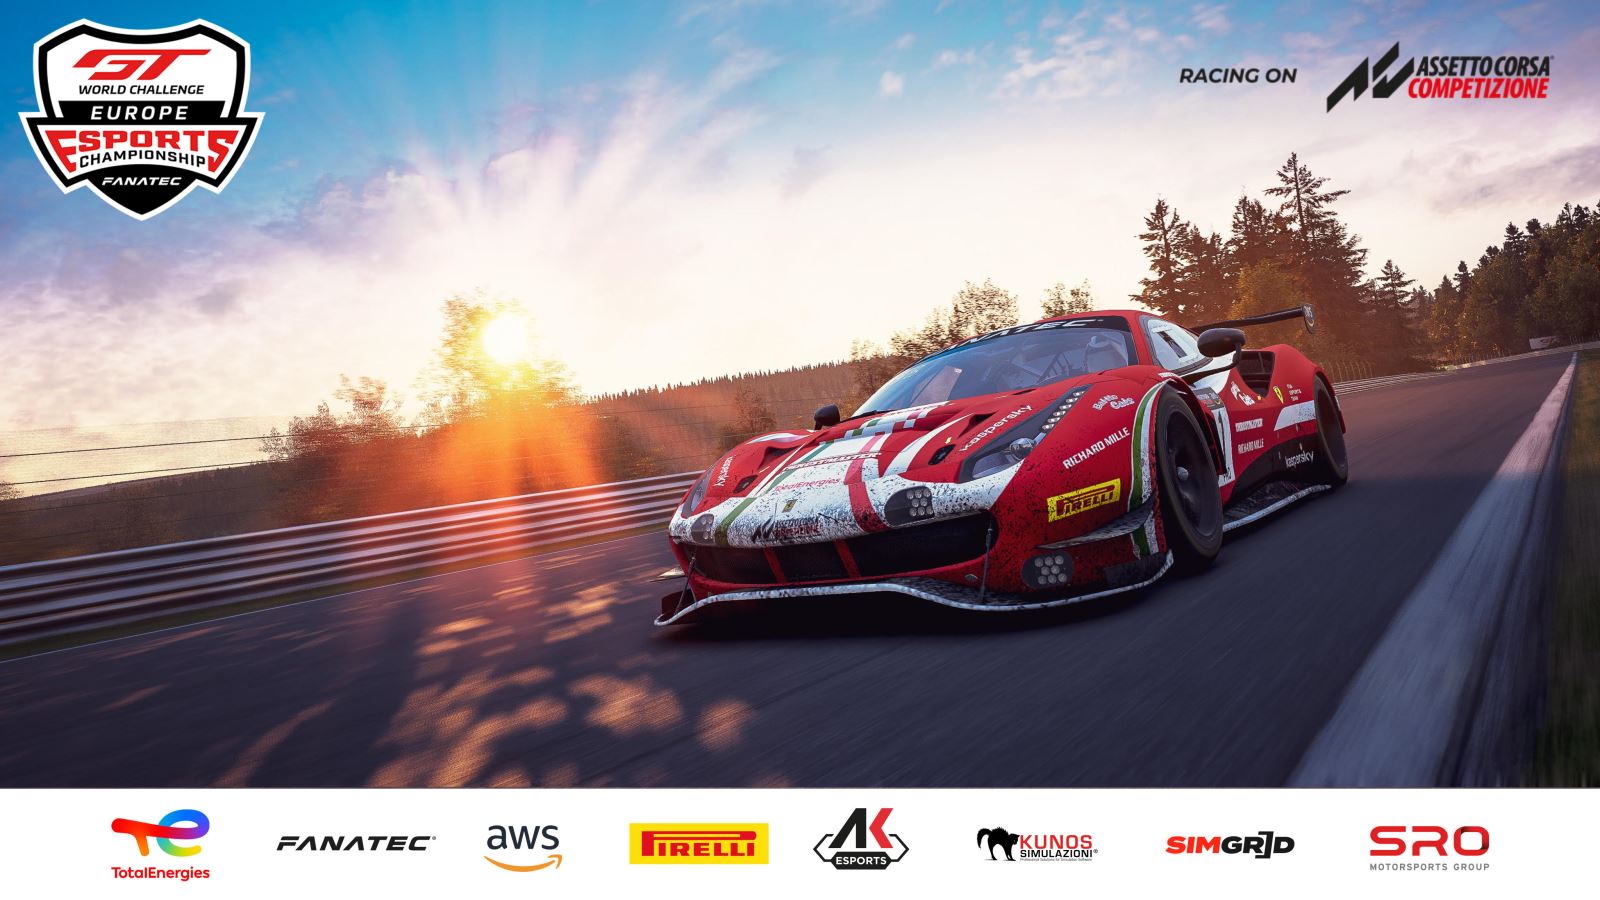 FDA Esports Team celebrates 24 Hours of Spa victory thanks to ultra-professional performance from Ferrari crew